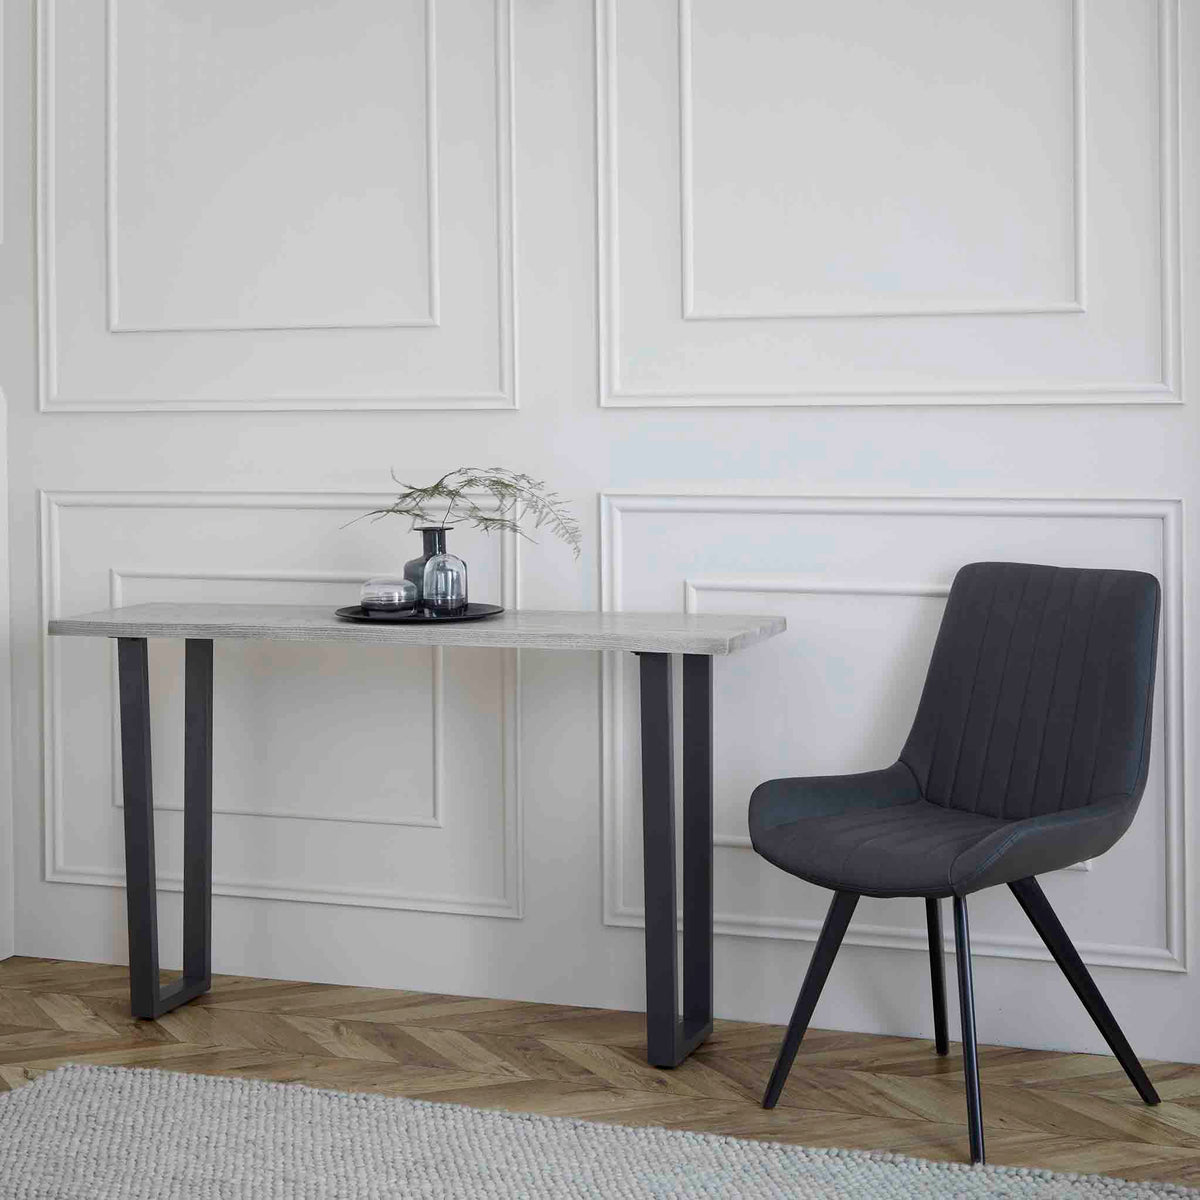 Soho Console or Hall Table - Lifestyle